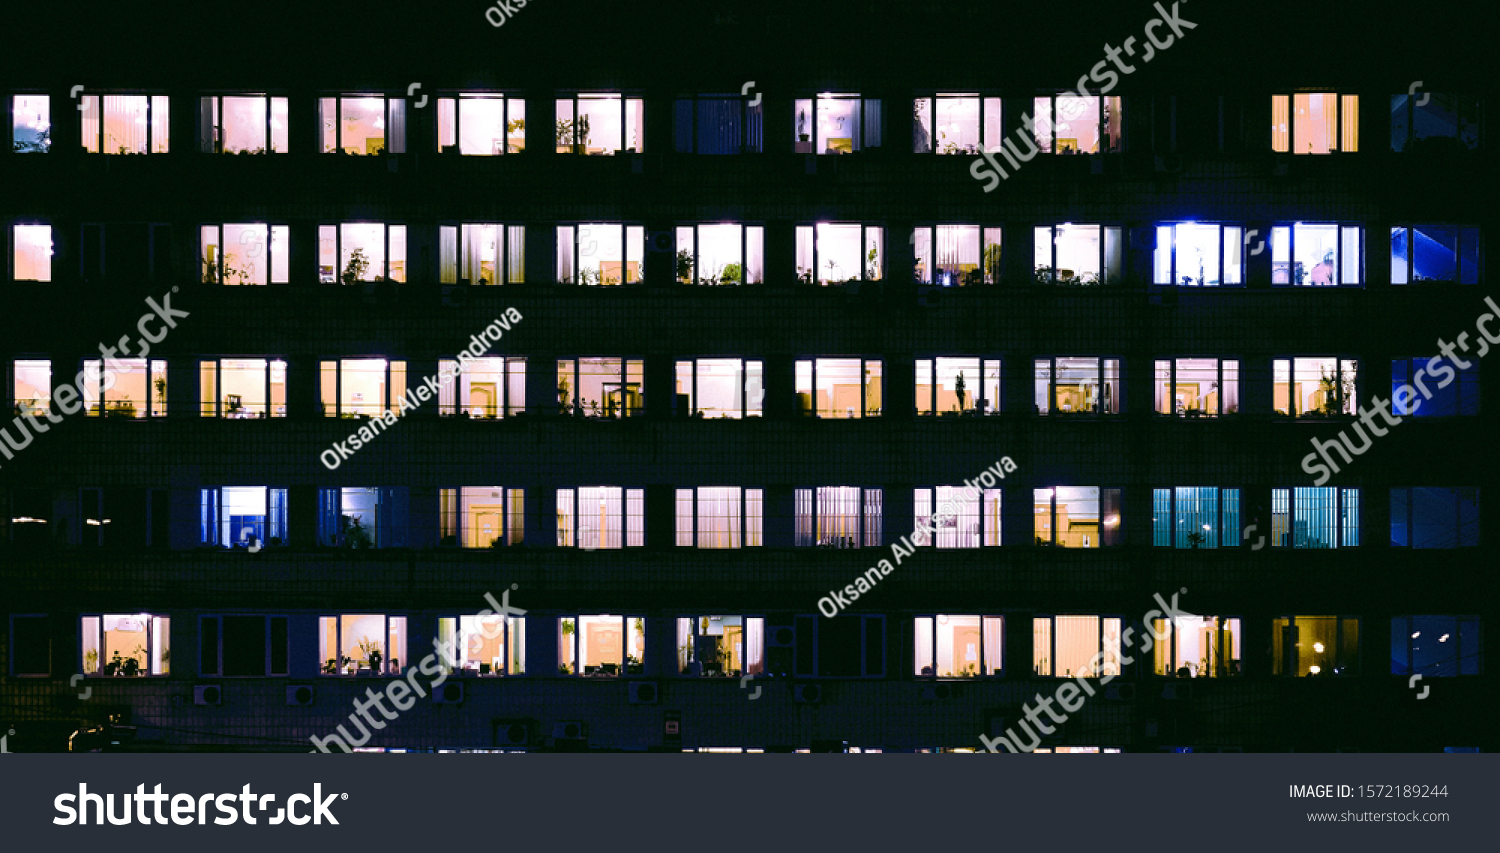 tetris of windows with light inside in the evening #1572189244